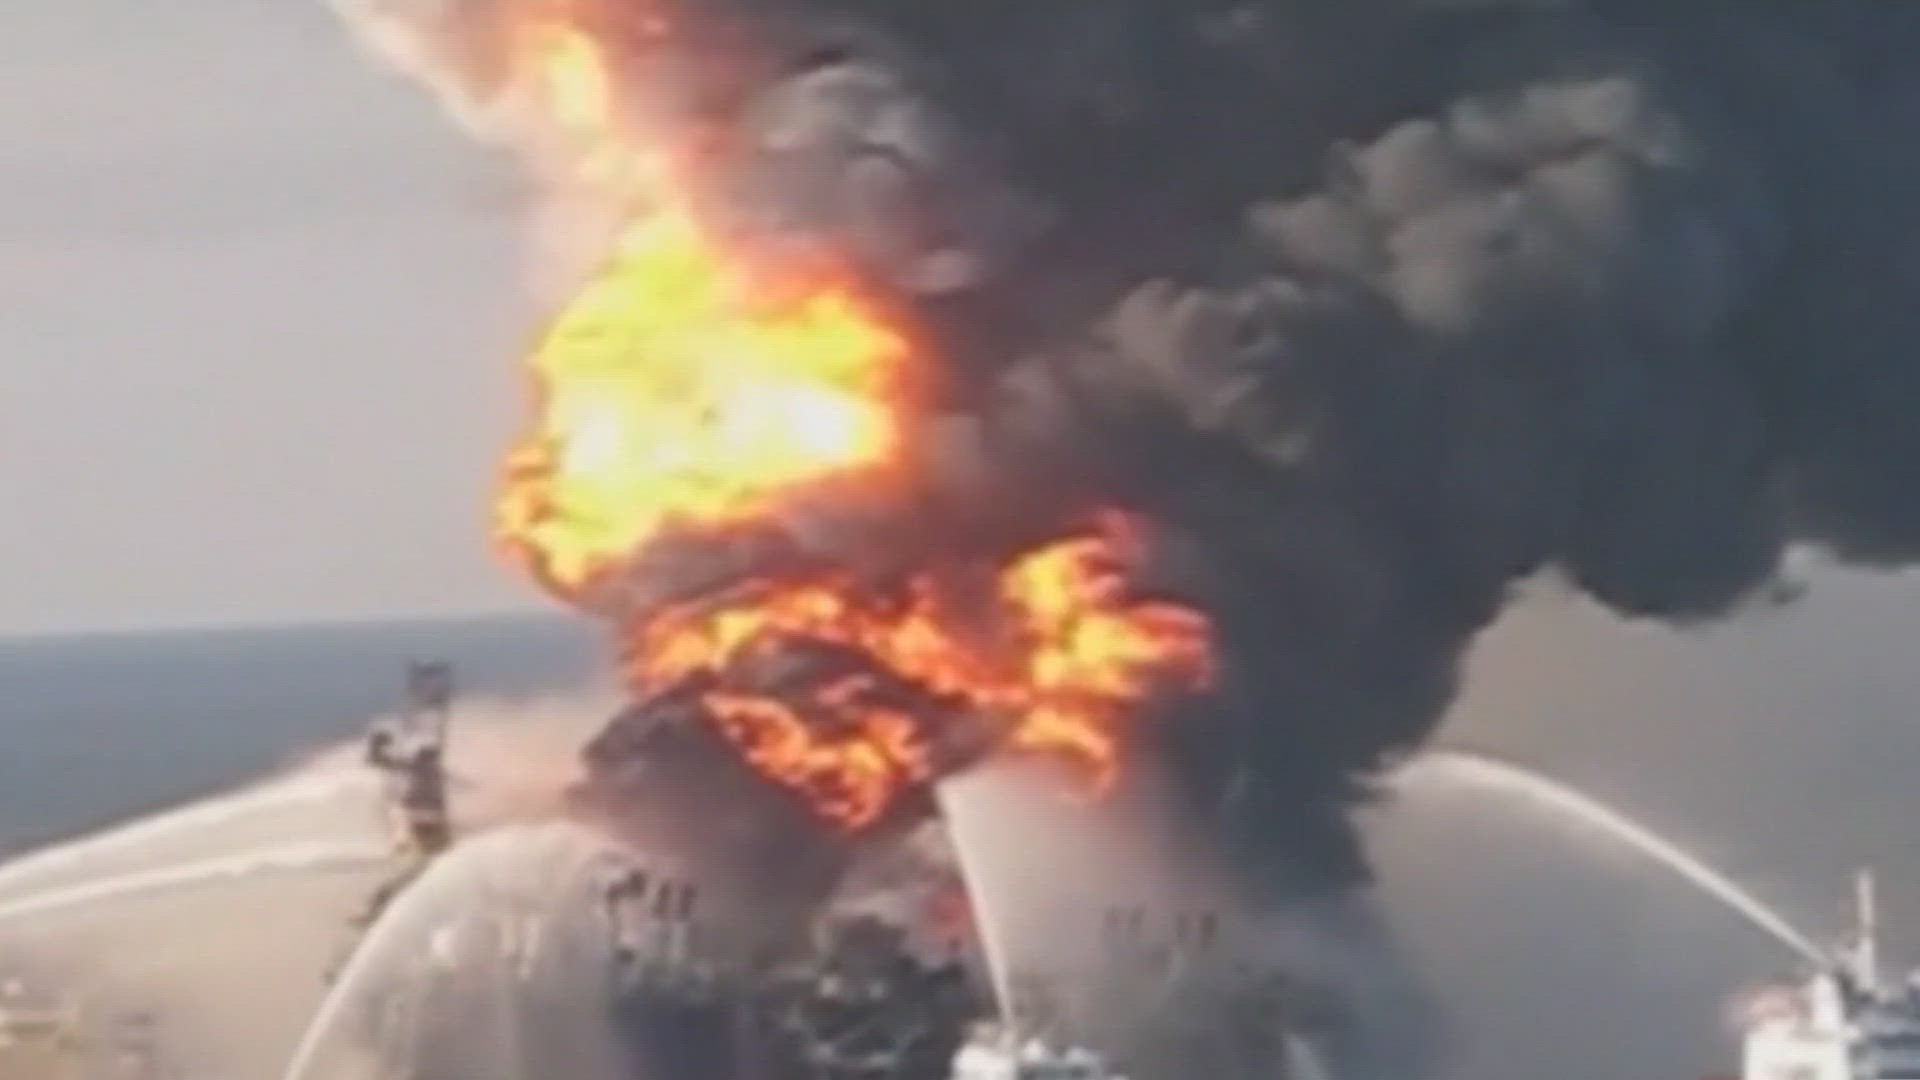 Eleven workers died on the rig in what would become the worst environmental disaster in U.S. history.